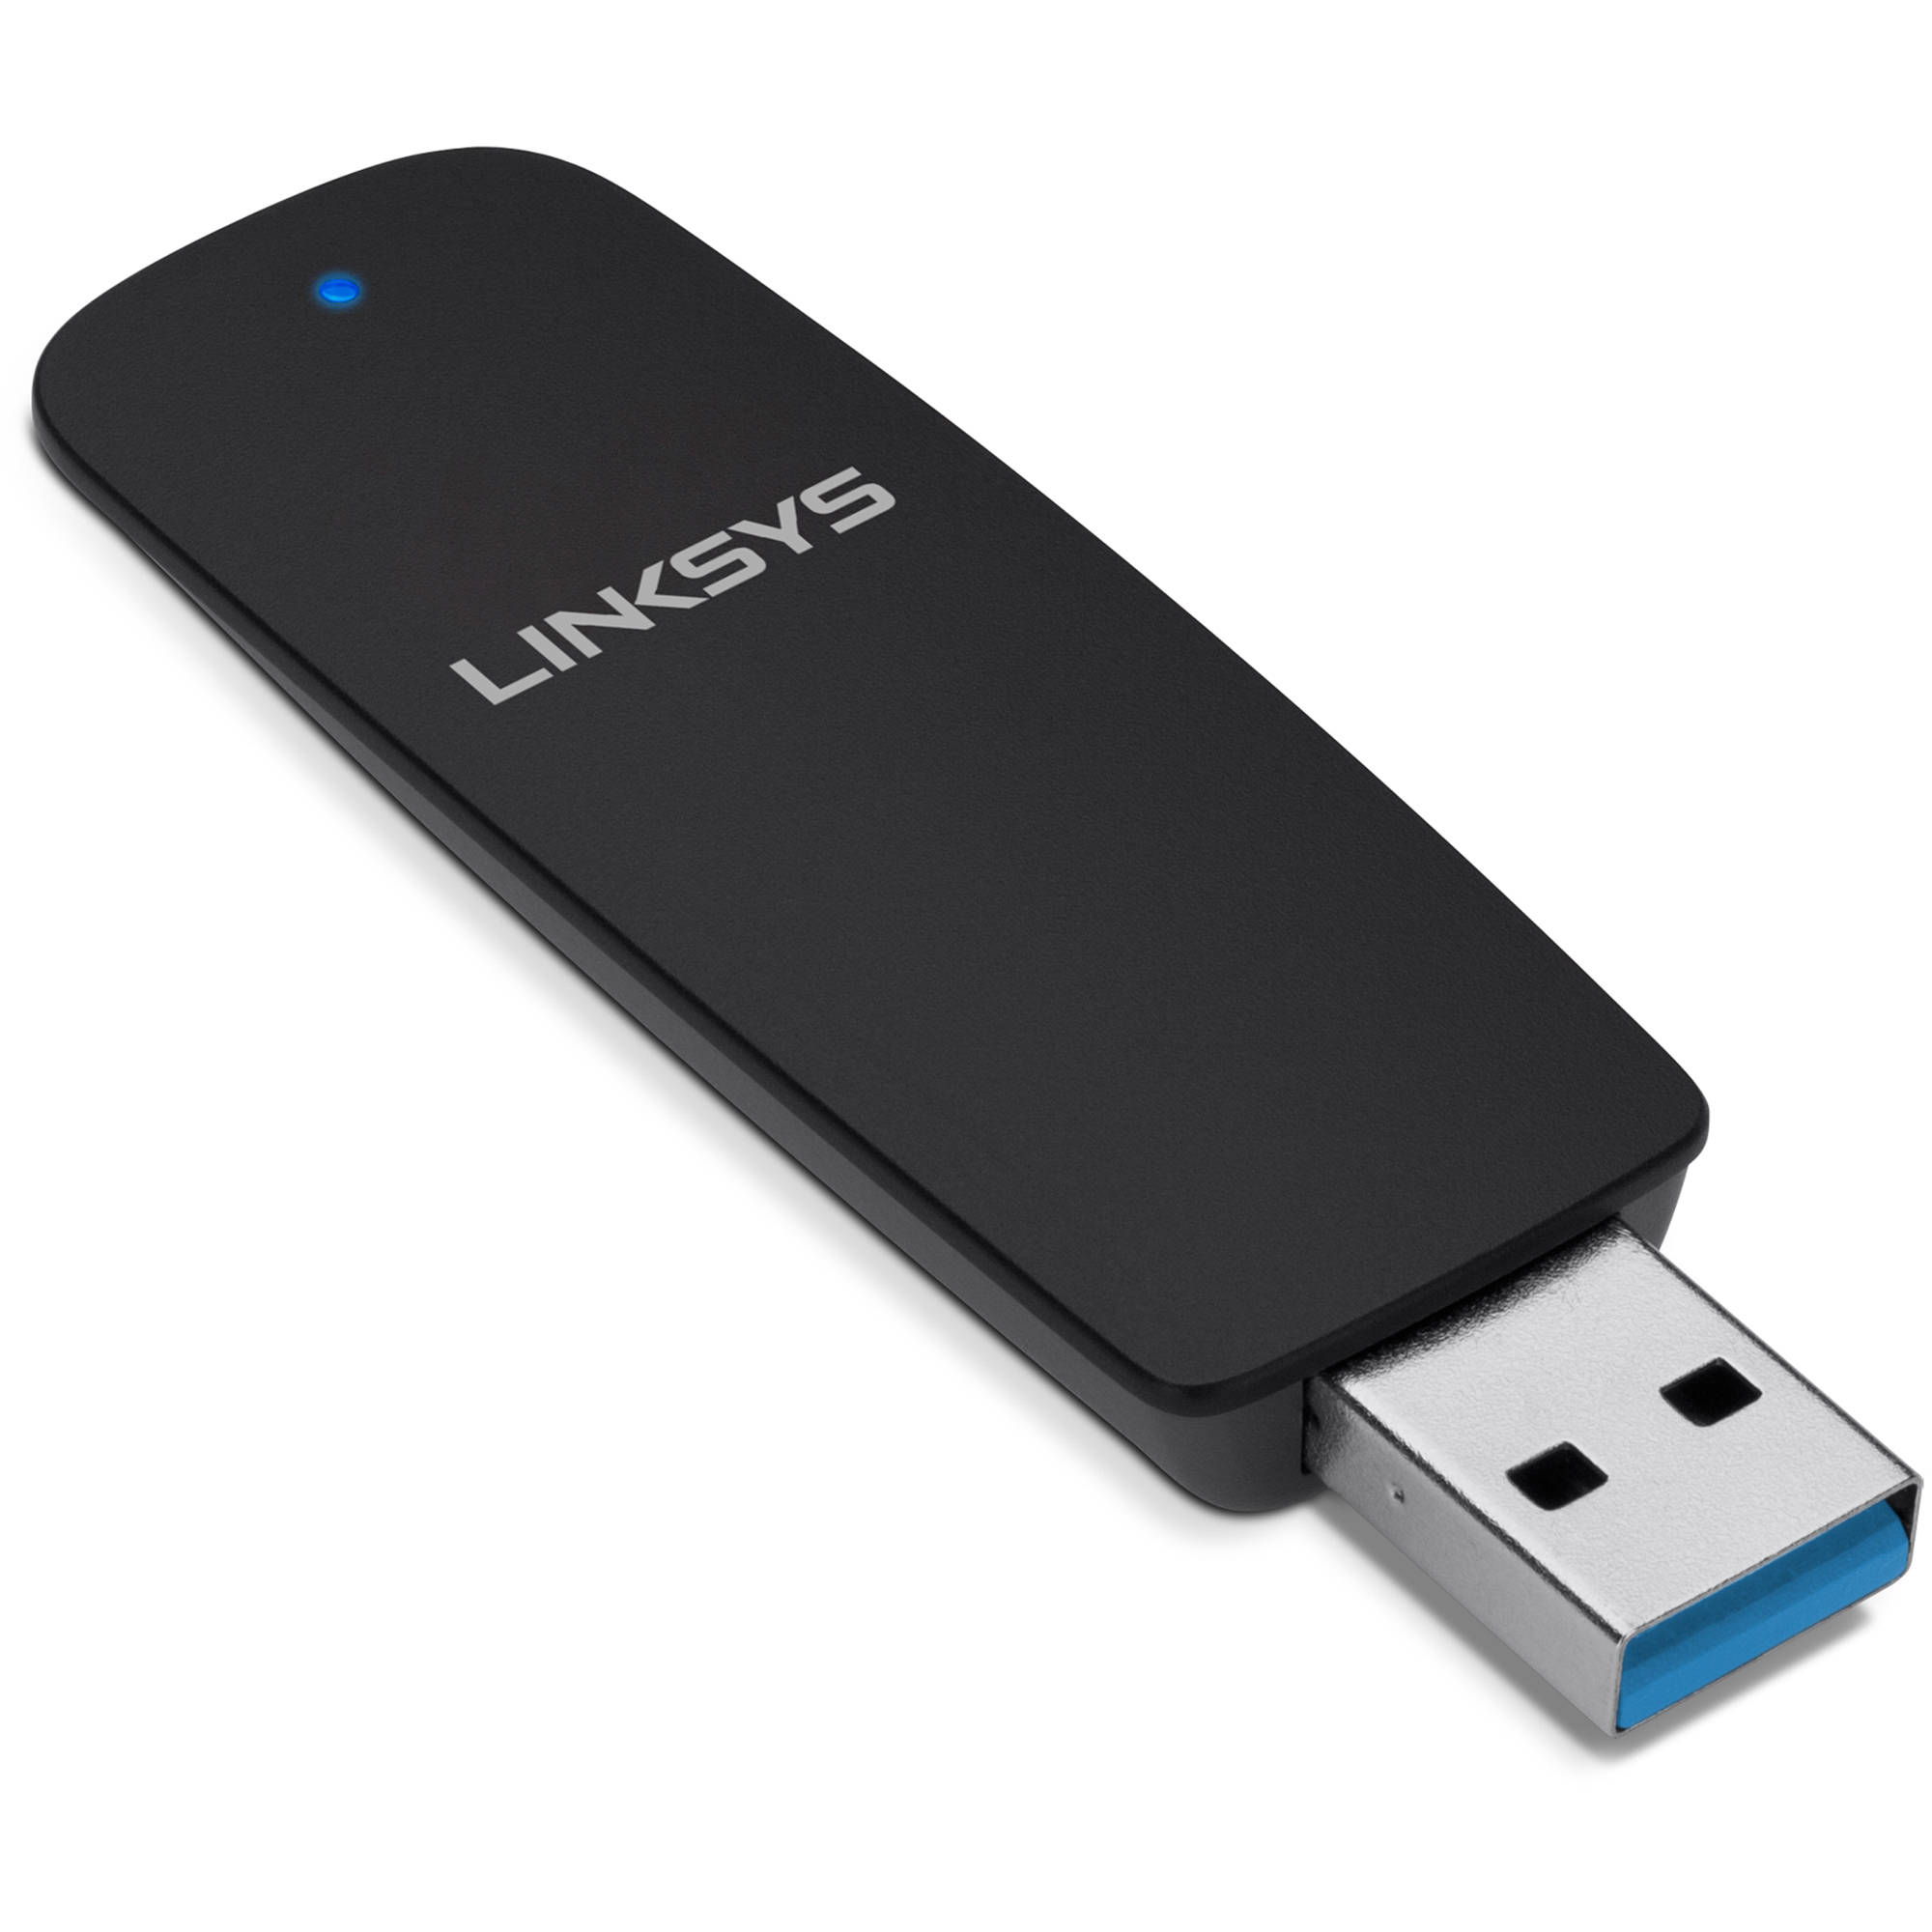 Cisco usb wireless adapter ae2500 driver download